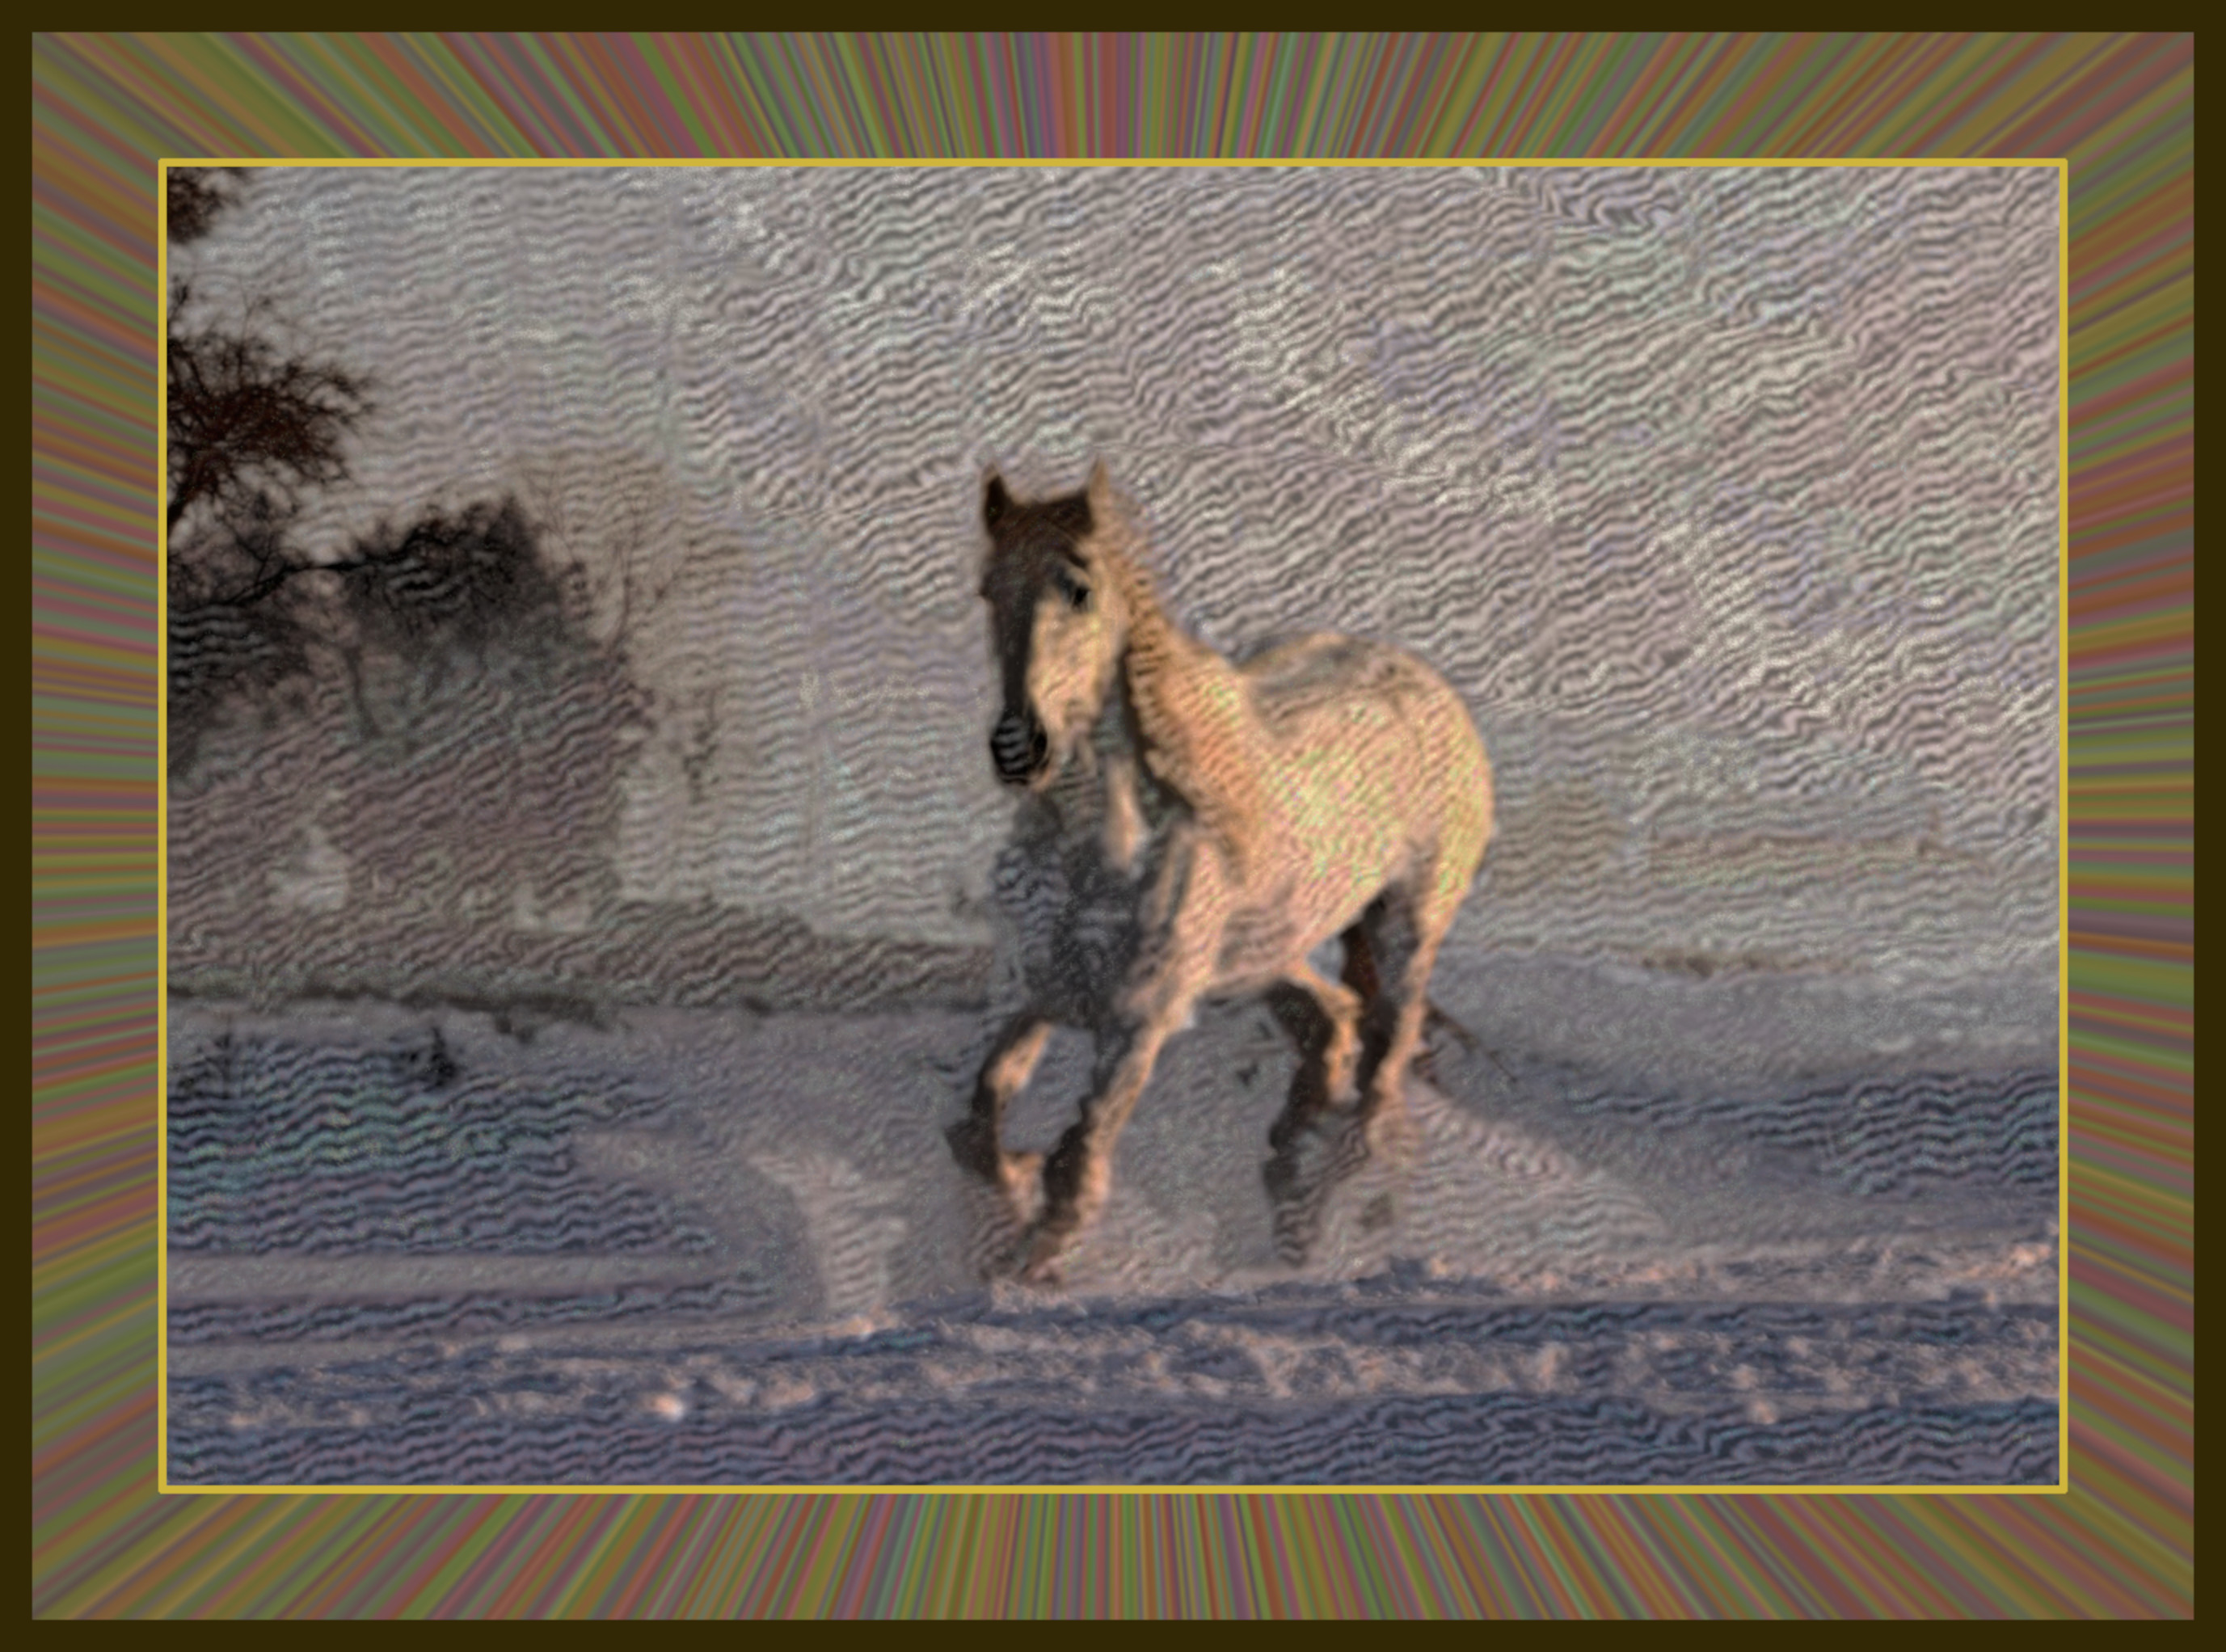 2020-12-15 12-59-46 white-horse-3010129_960_720, stroked  using 11 colours giving 25.0% influence to the edges (framed 10%).jpeg